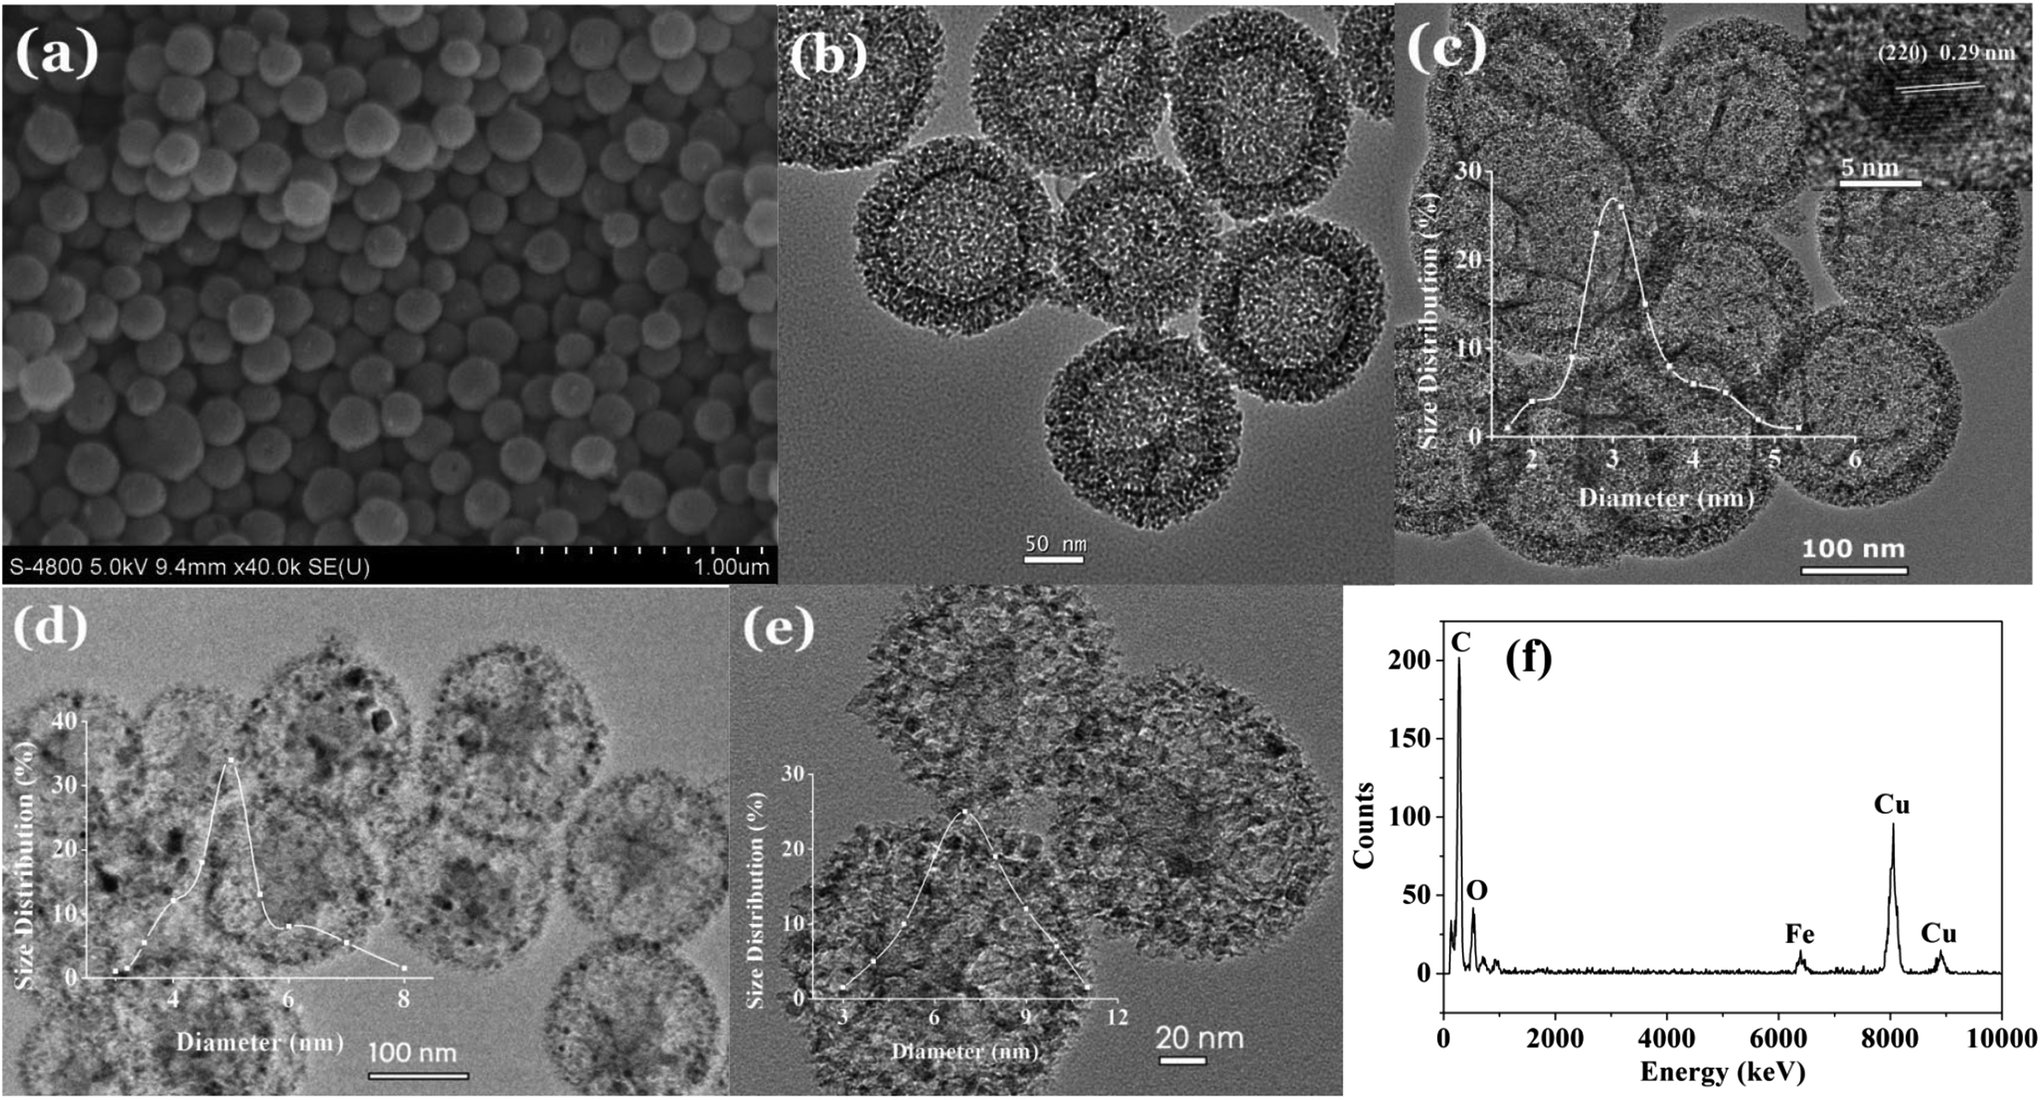 Efficient And Chemoselective Hydrogenation Of Nitroarenes By G Fe 2 O 3 Modified Hollow Mesoporous Carbon Microspheres Inorganic Chemistry Frontiers Rsc Publishing Doi 10 1039 C6qic